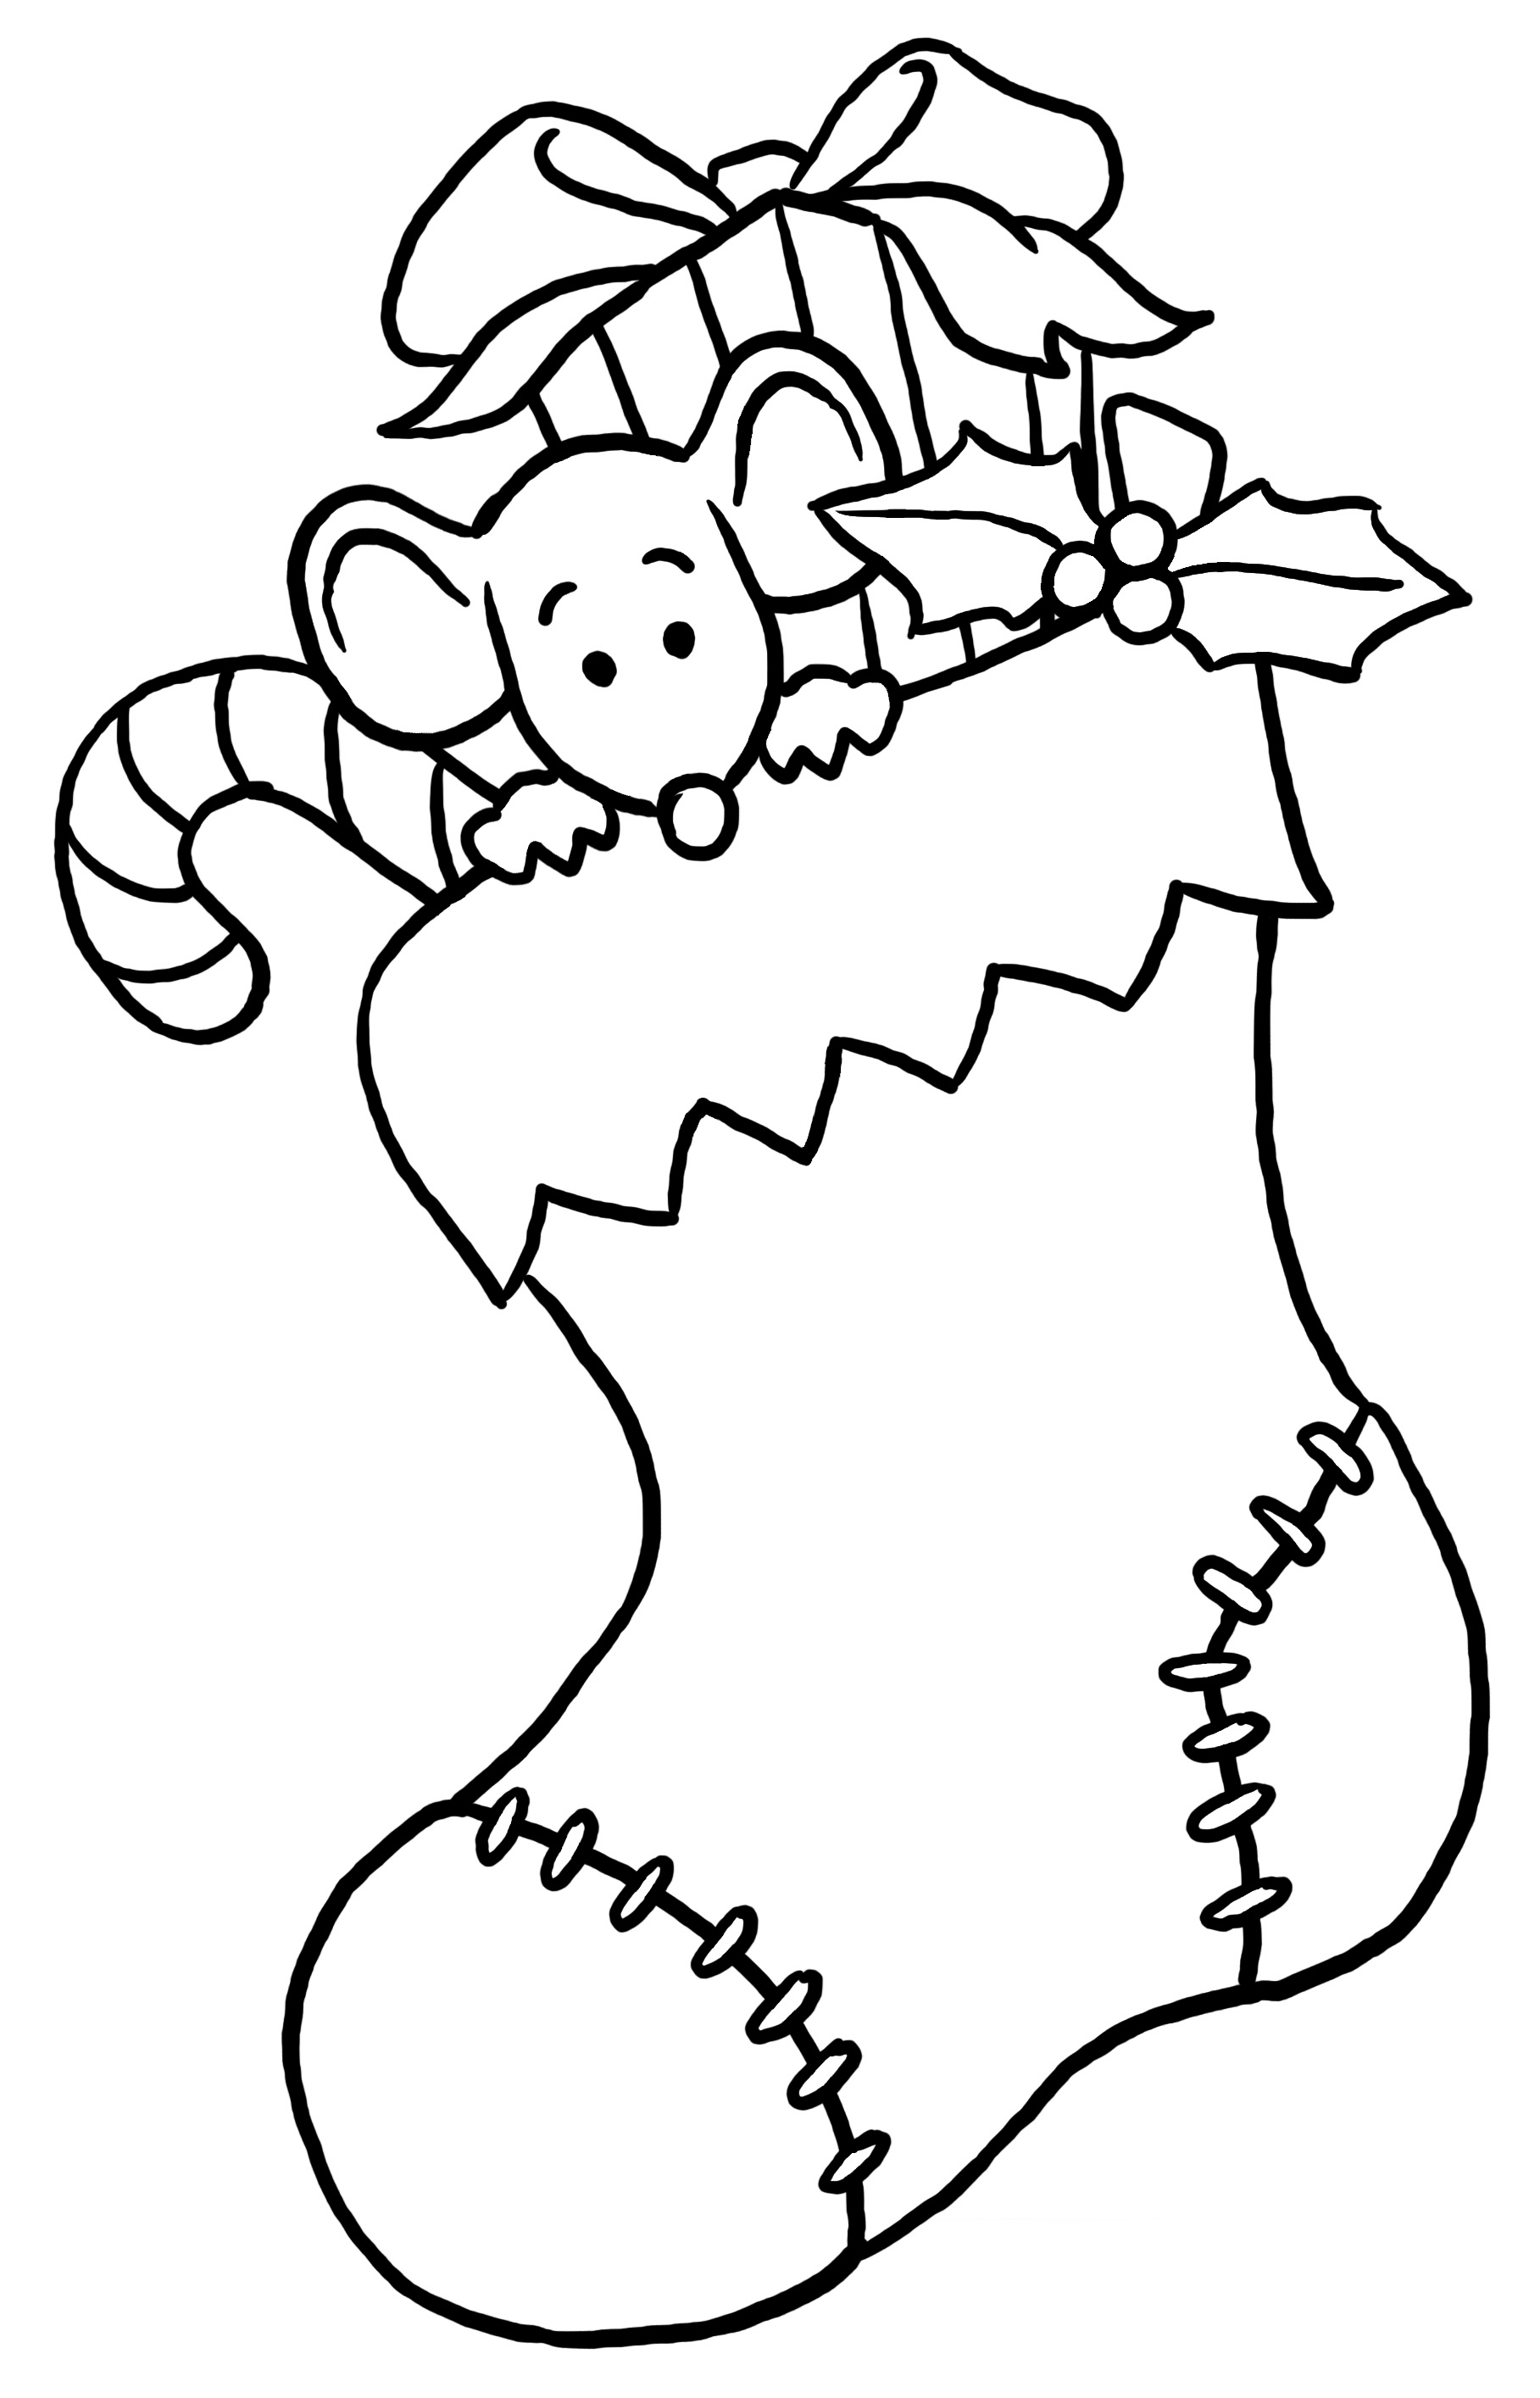 Free Christmas Printable Coloring Pages Coloring Coloring Sheets To Print Out Free Christmas Puzzle Paper